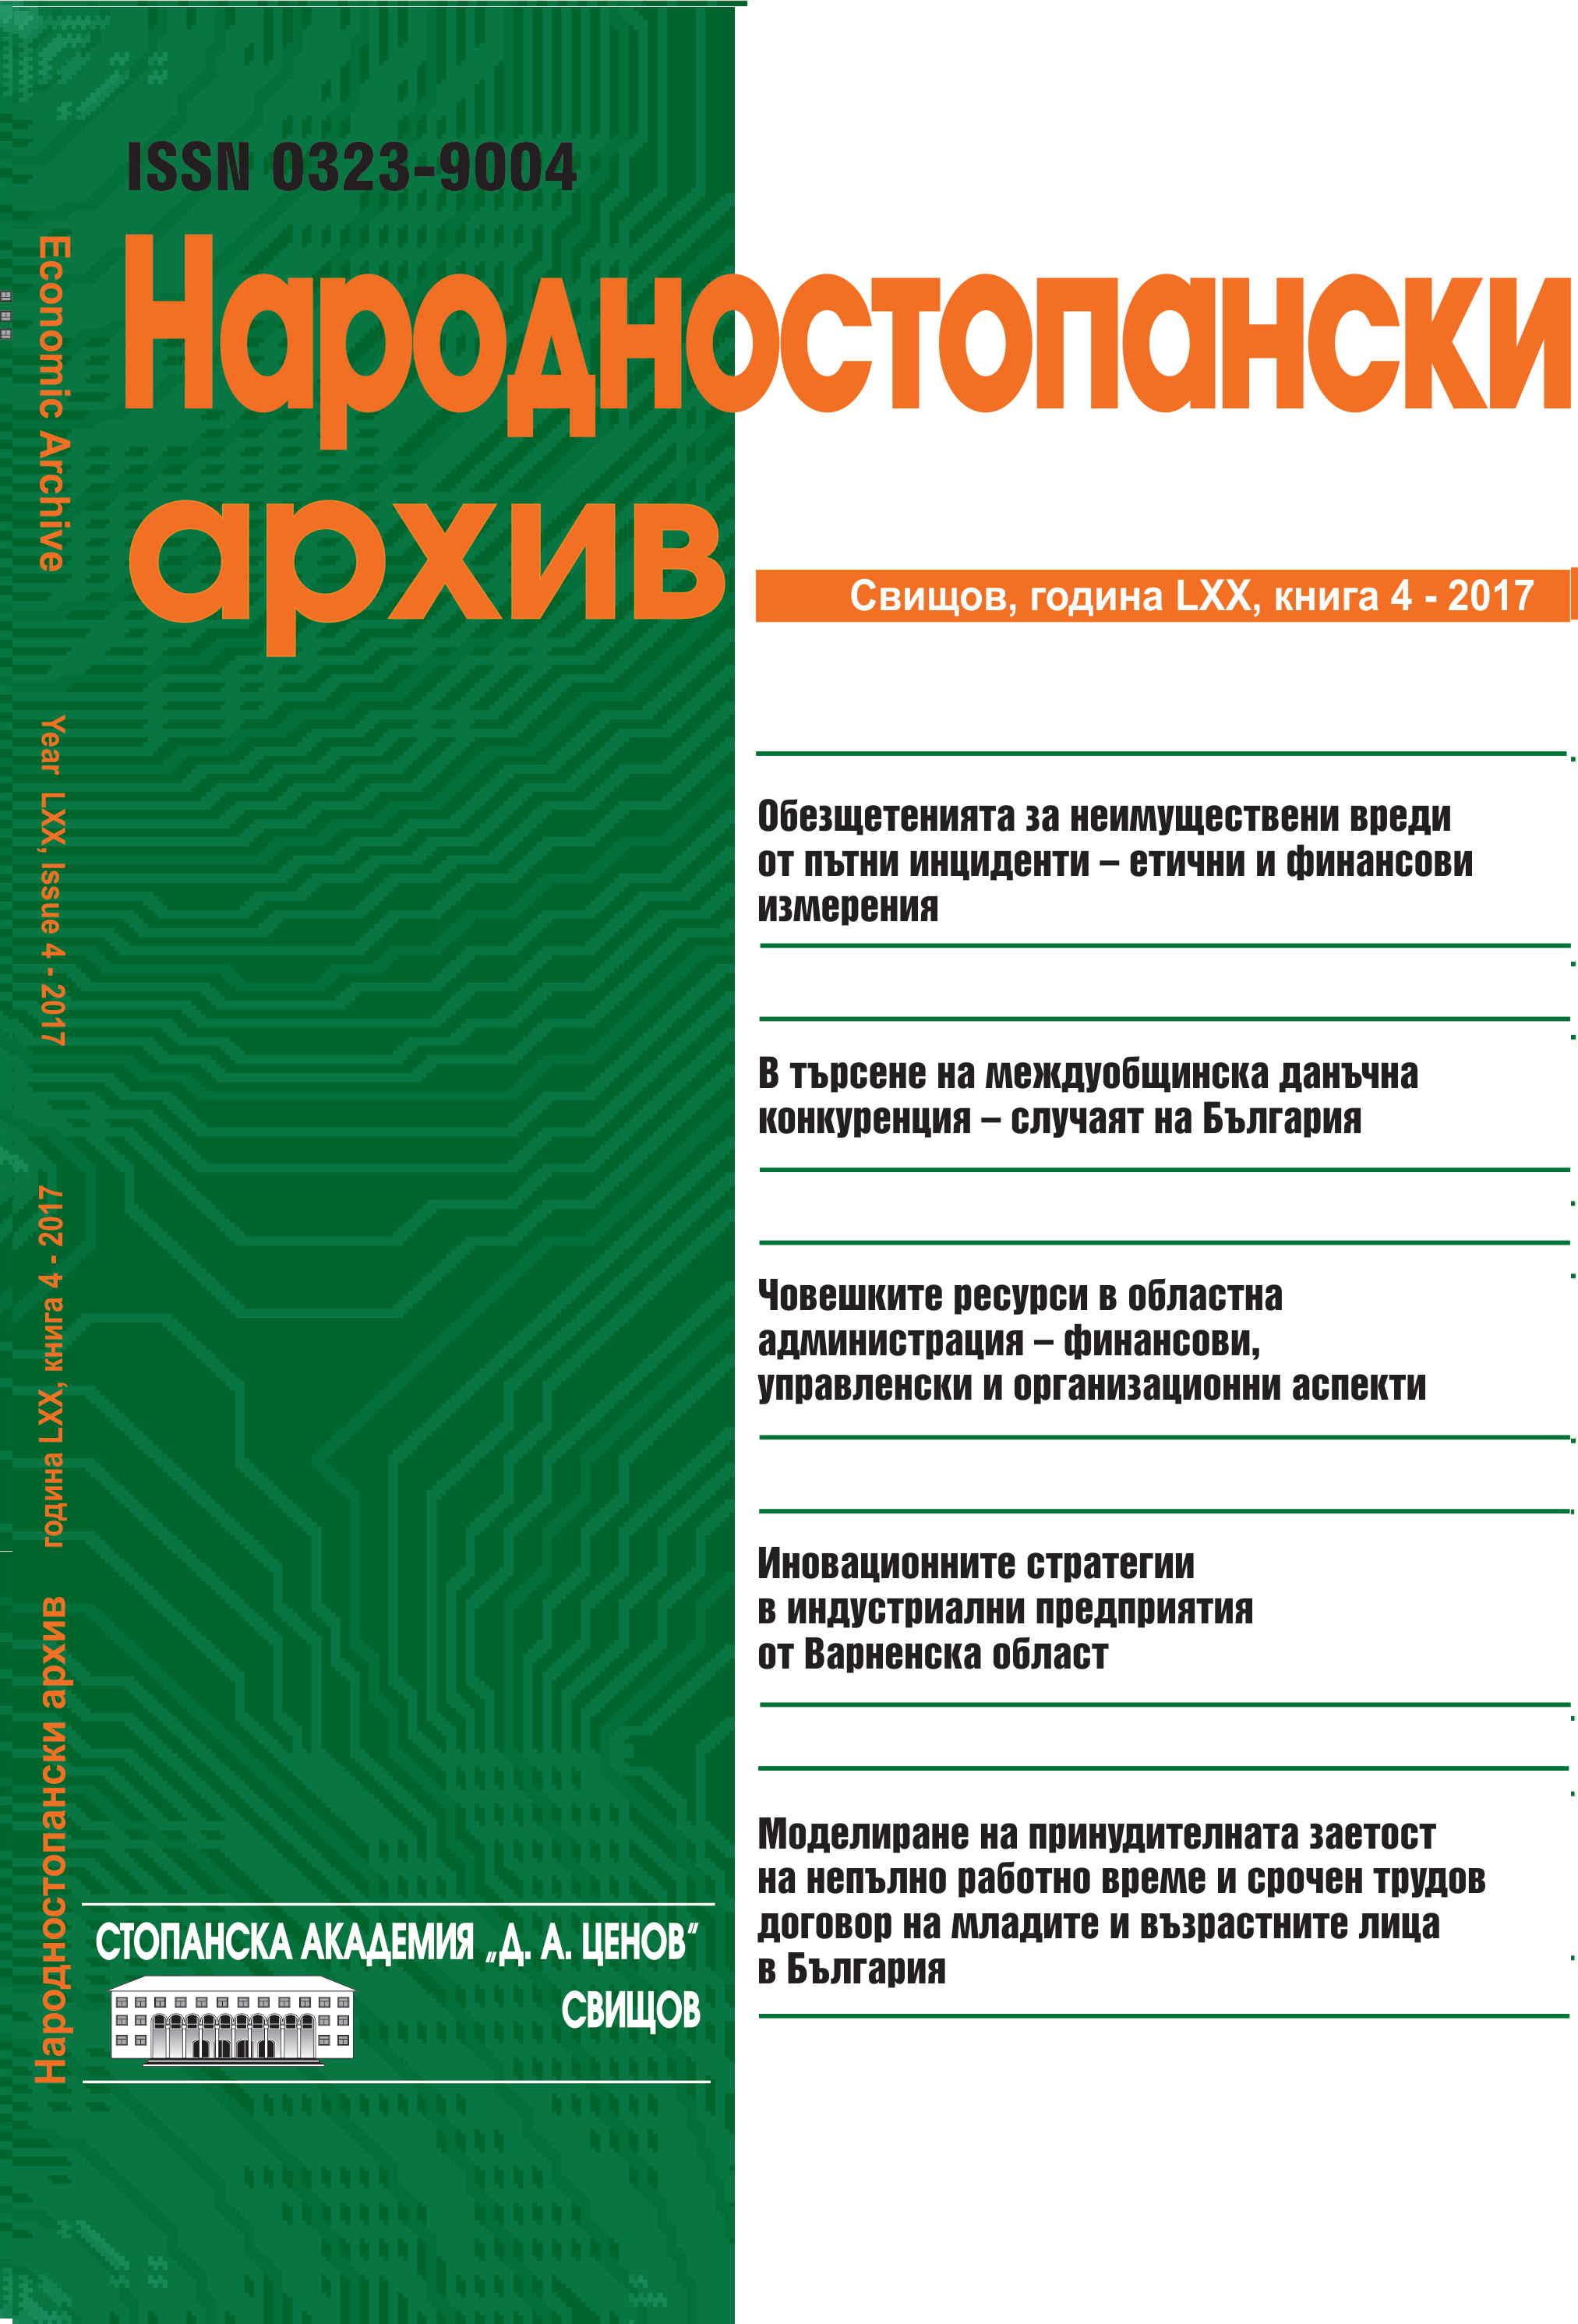 MODELLING INVOLUNTARY PART-TIME AND FIXED-TERM EMPLOYMENT AMONG YOUNG PEOPLE AND ADULTS IN BULGARIA Cover Image